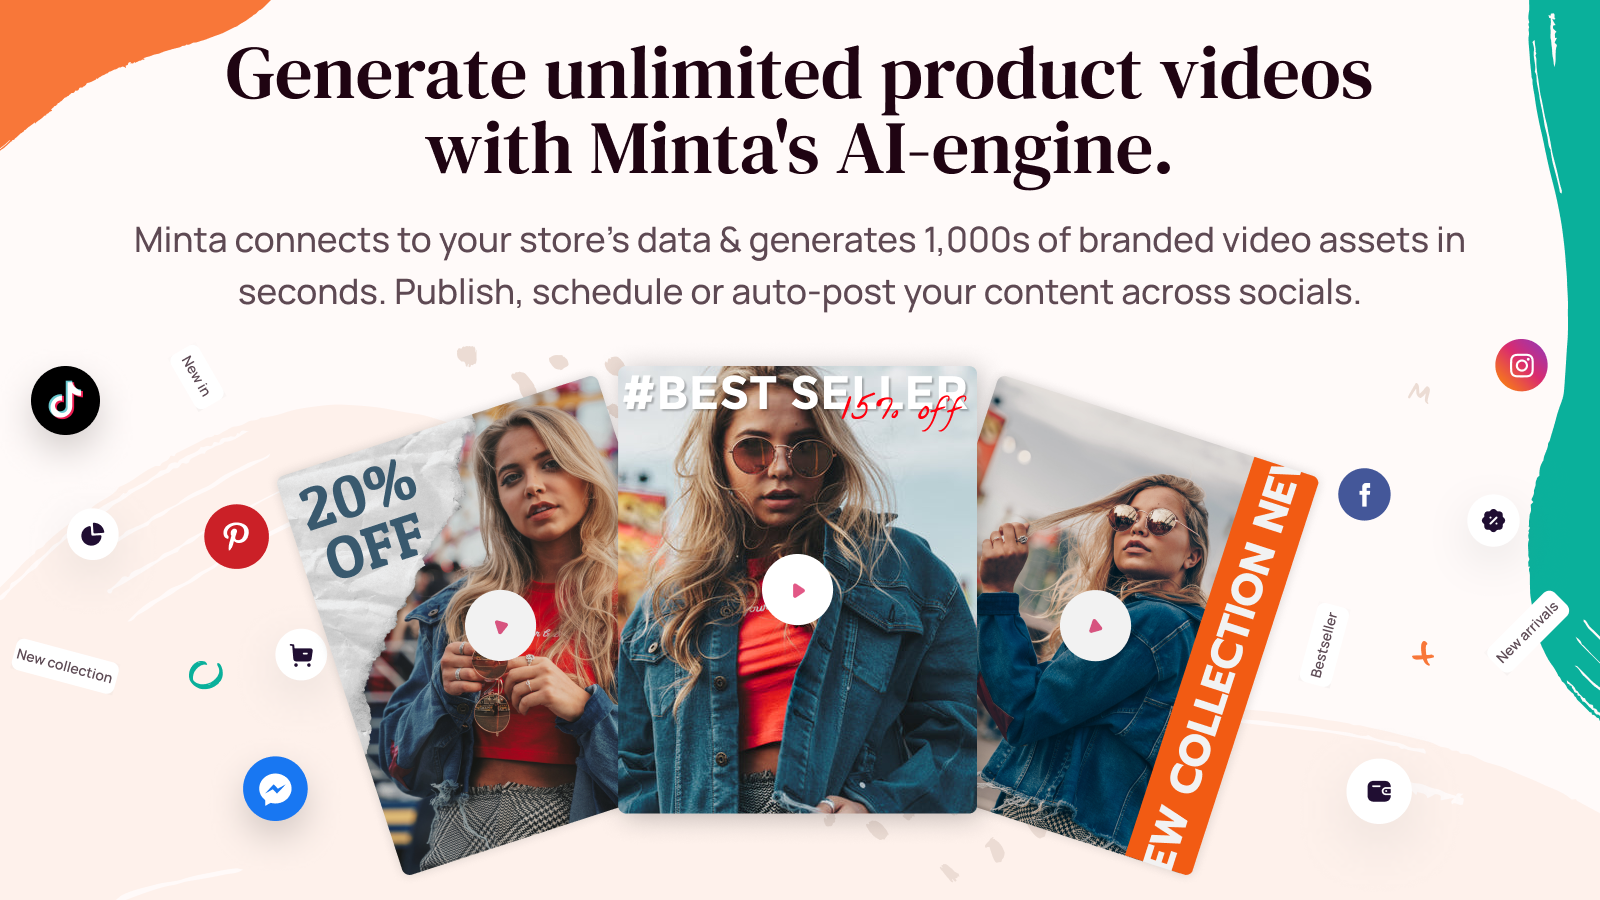 Your entire store catalog turned into stunning videos for social